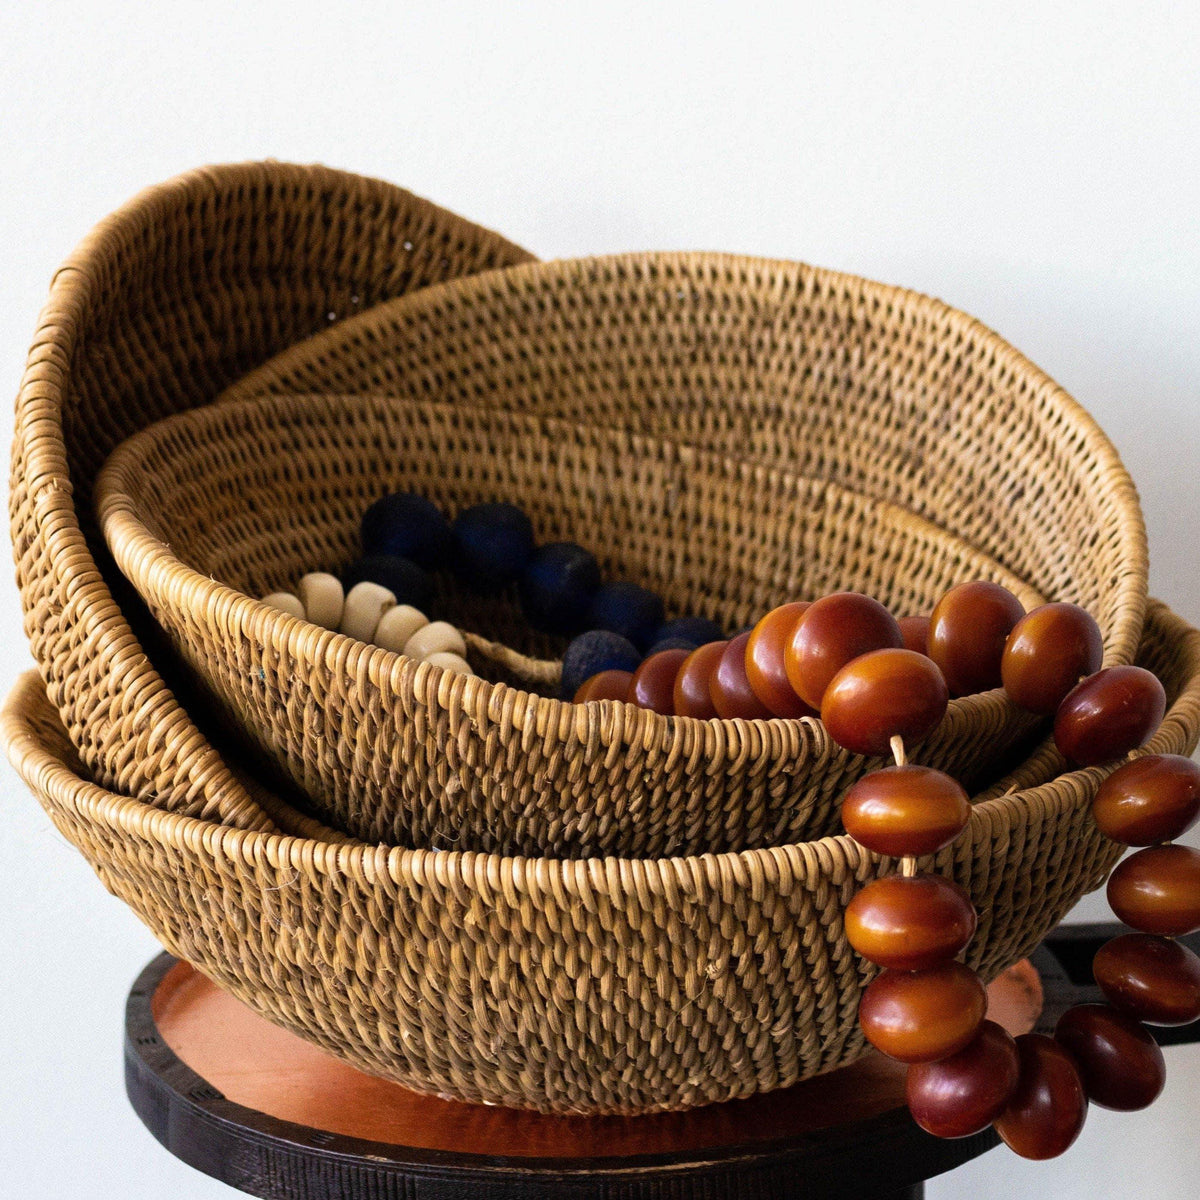 Buhera Harvest Bowls Nesting kanju interiors Intricate handwoven basket artisan natural centerpiece bowl wall décor shelf décor natural decorative accent hand made catch-all pattern geometric Firm durable cane sturdy customizable custom sizes metallic stripes indoor outdoor stylish storage bowl basket vessel catch all functional 